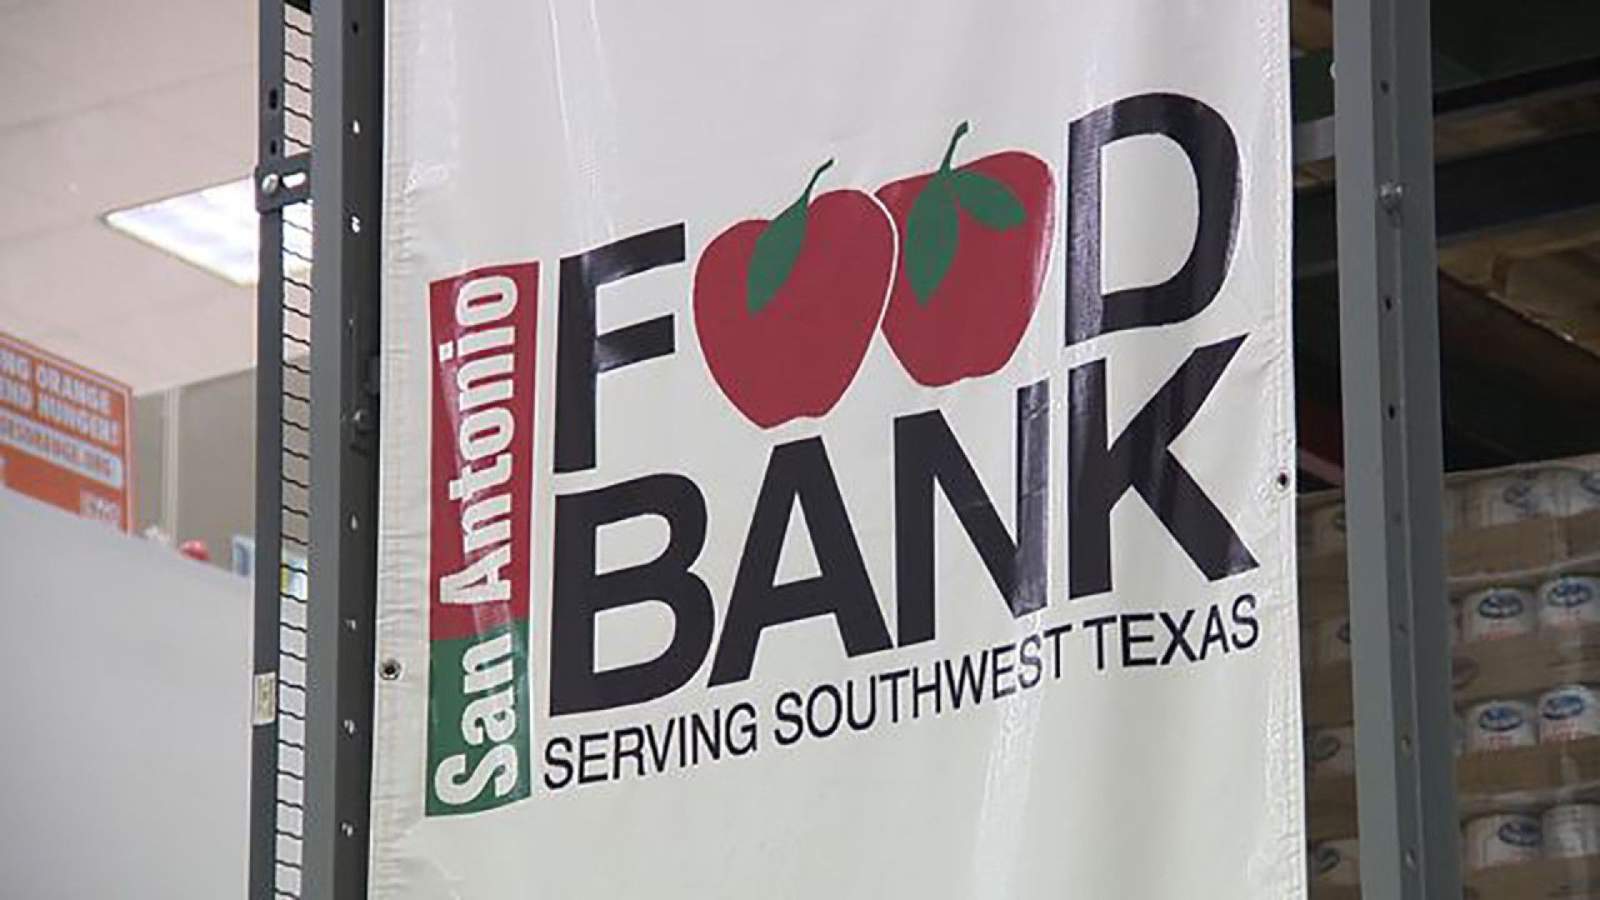 ‘Christmas miracle’: San Antonio Food Bank finds thousands in unclaimed property